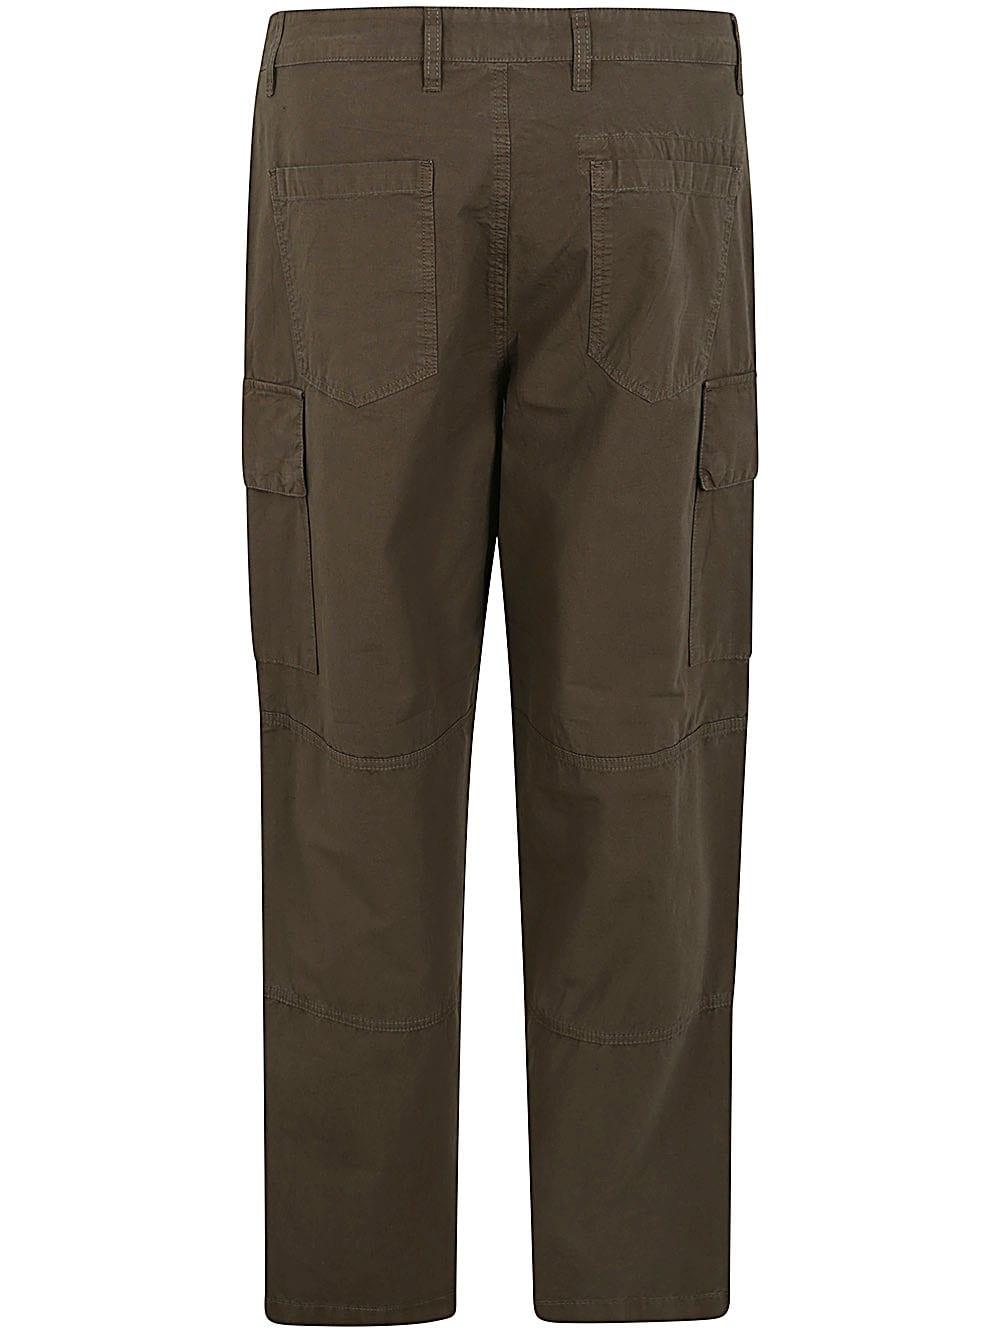 Barbour Essential Ripstop Cargo Trousers for Men